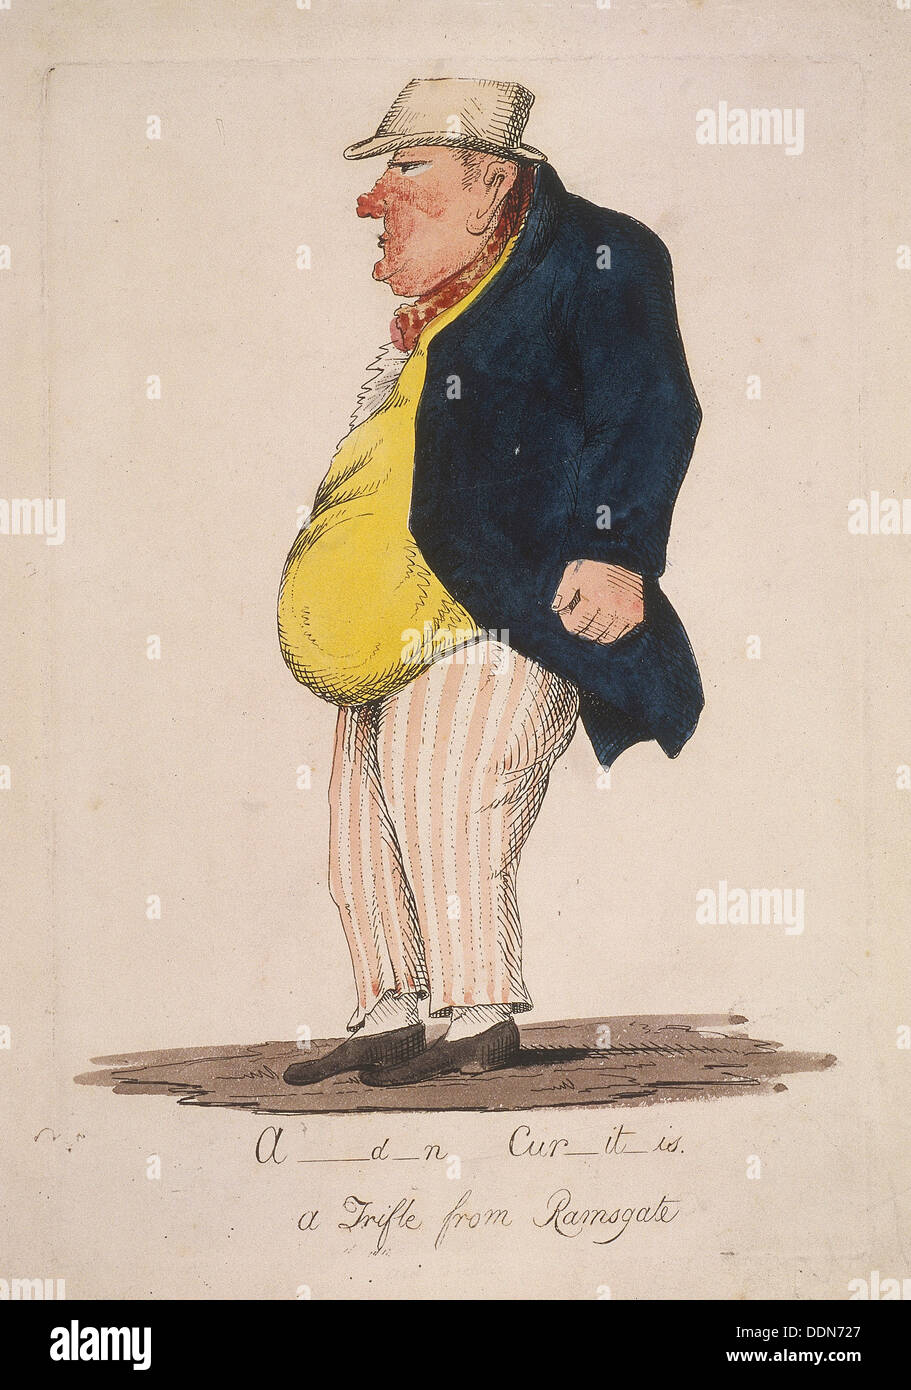 'A d n Cur it is. a Trifle from Ramsgate', (Alderman Curtis), c1821. Artist: Anon Stock Photo